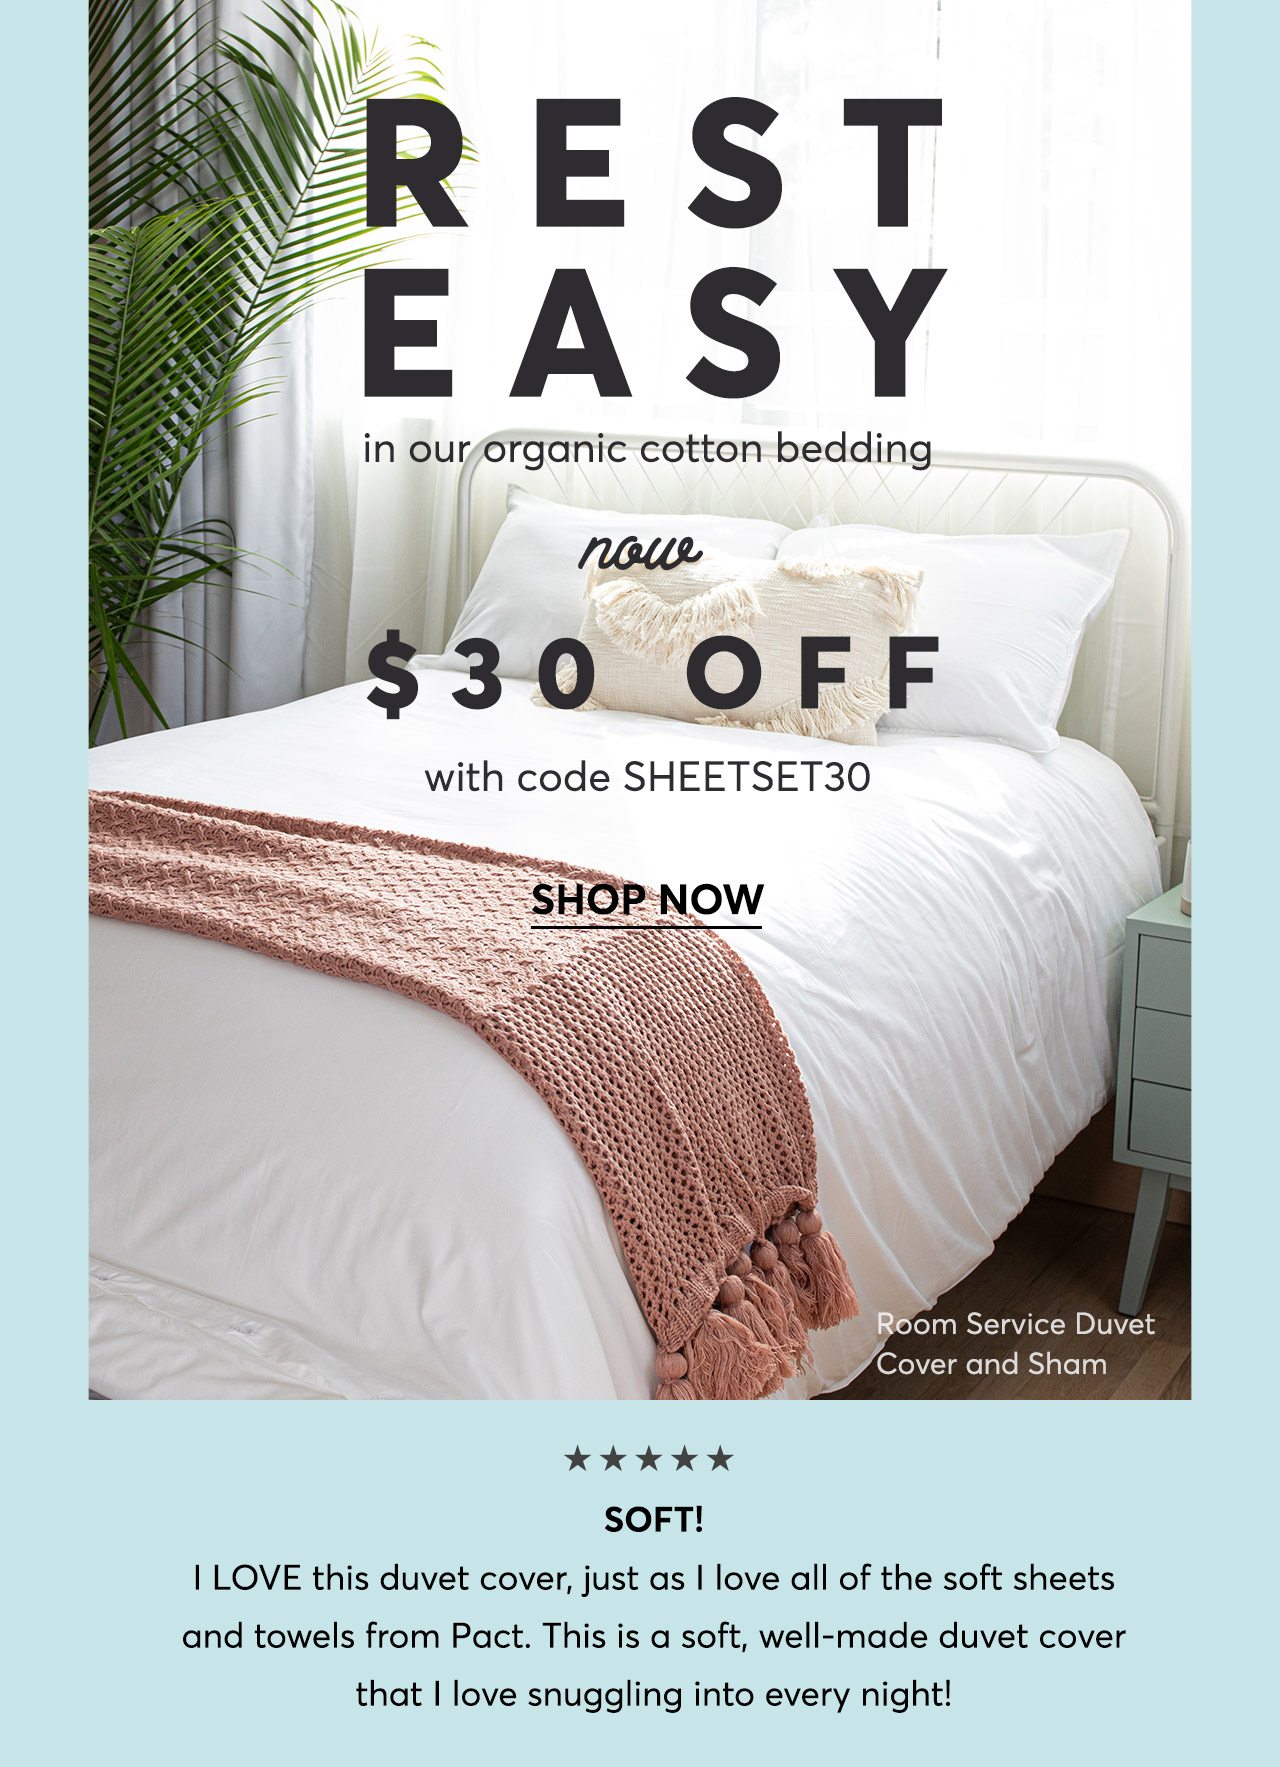 Rest easy! Our Organic Bedding Sets are $30 off with code SHEETSET30. Shop now.